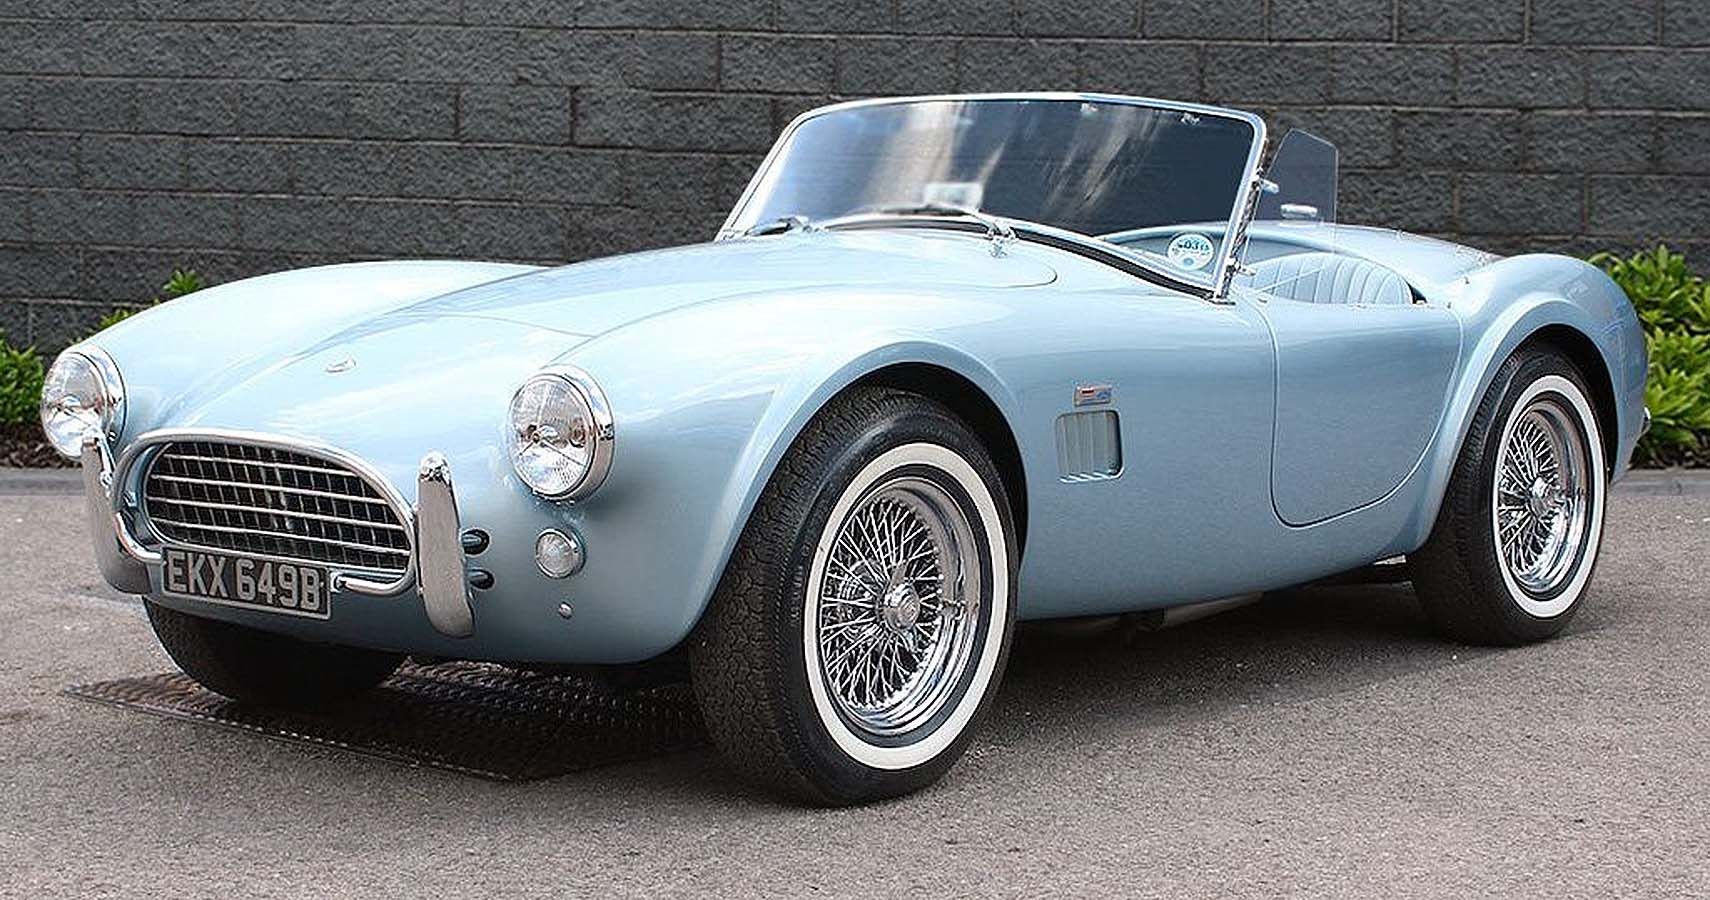 Even Before The GT40, There Was The Cobra